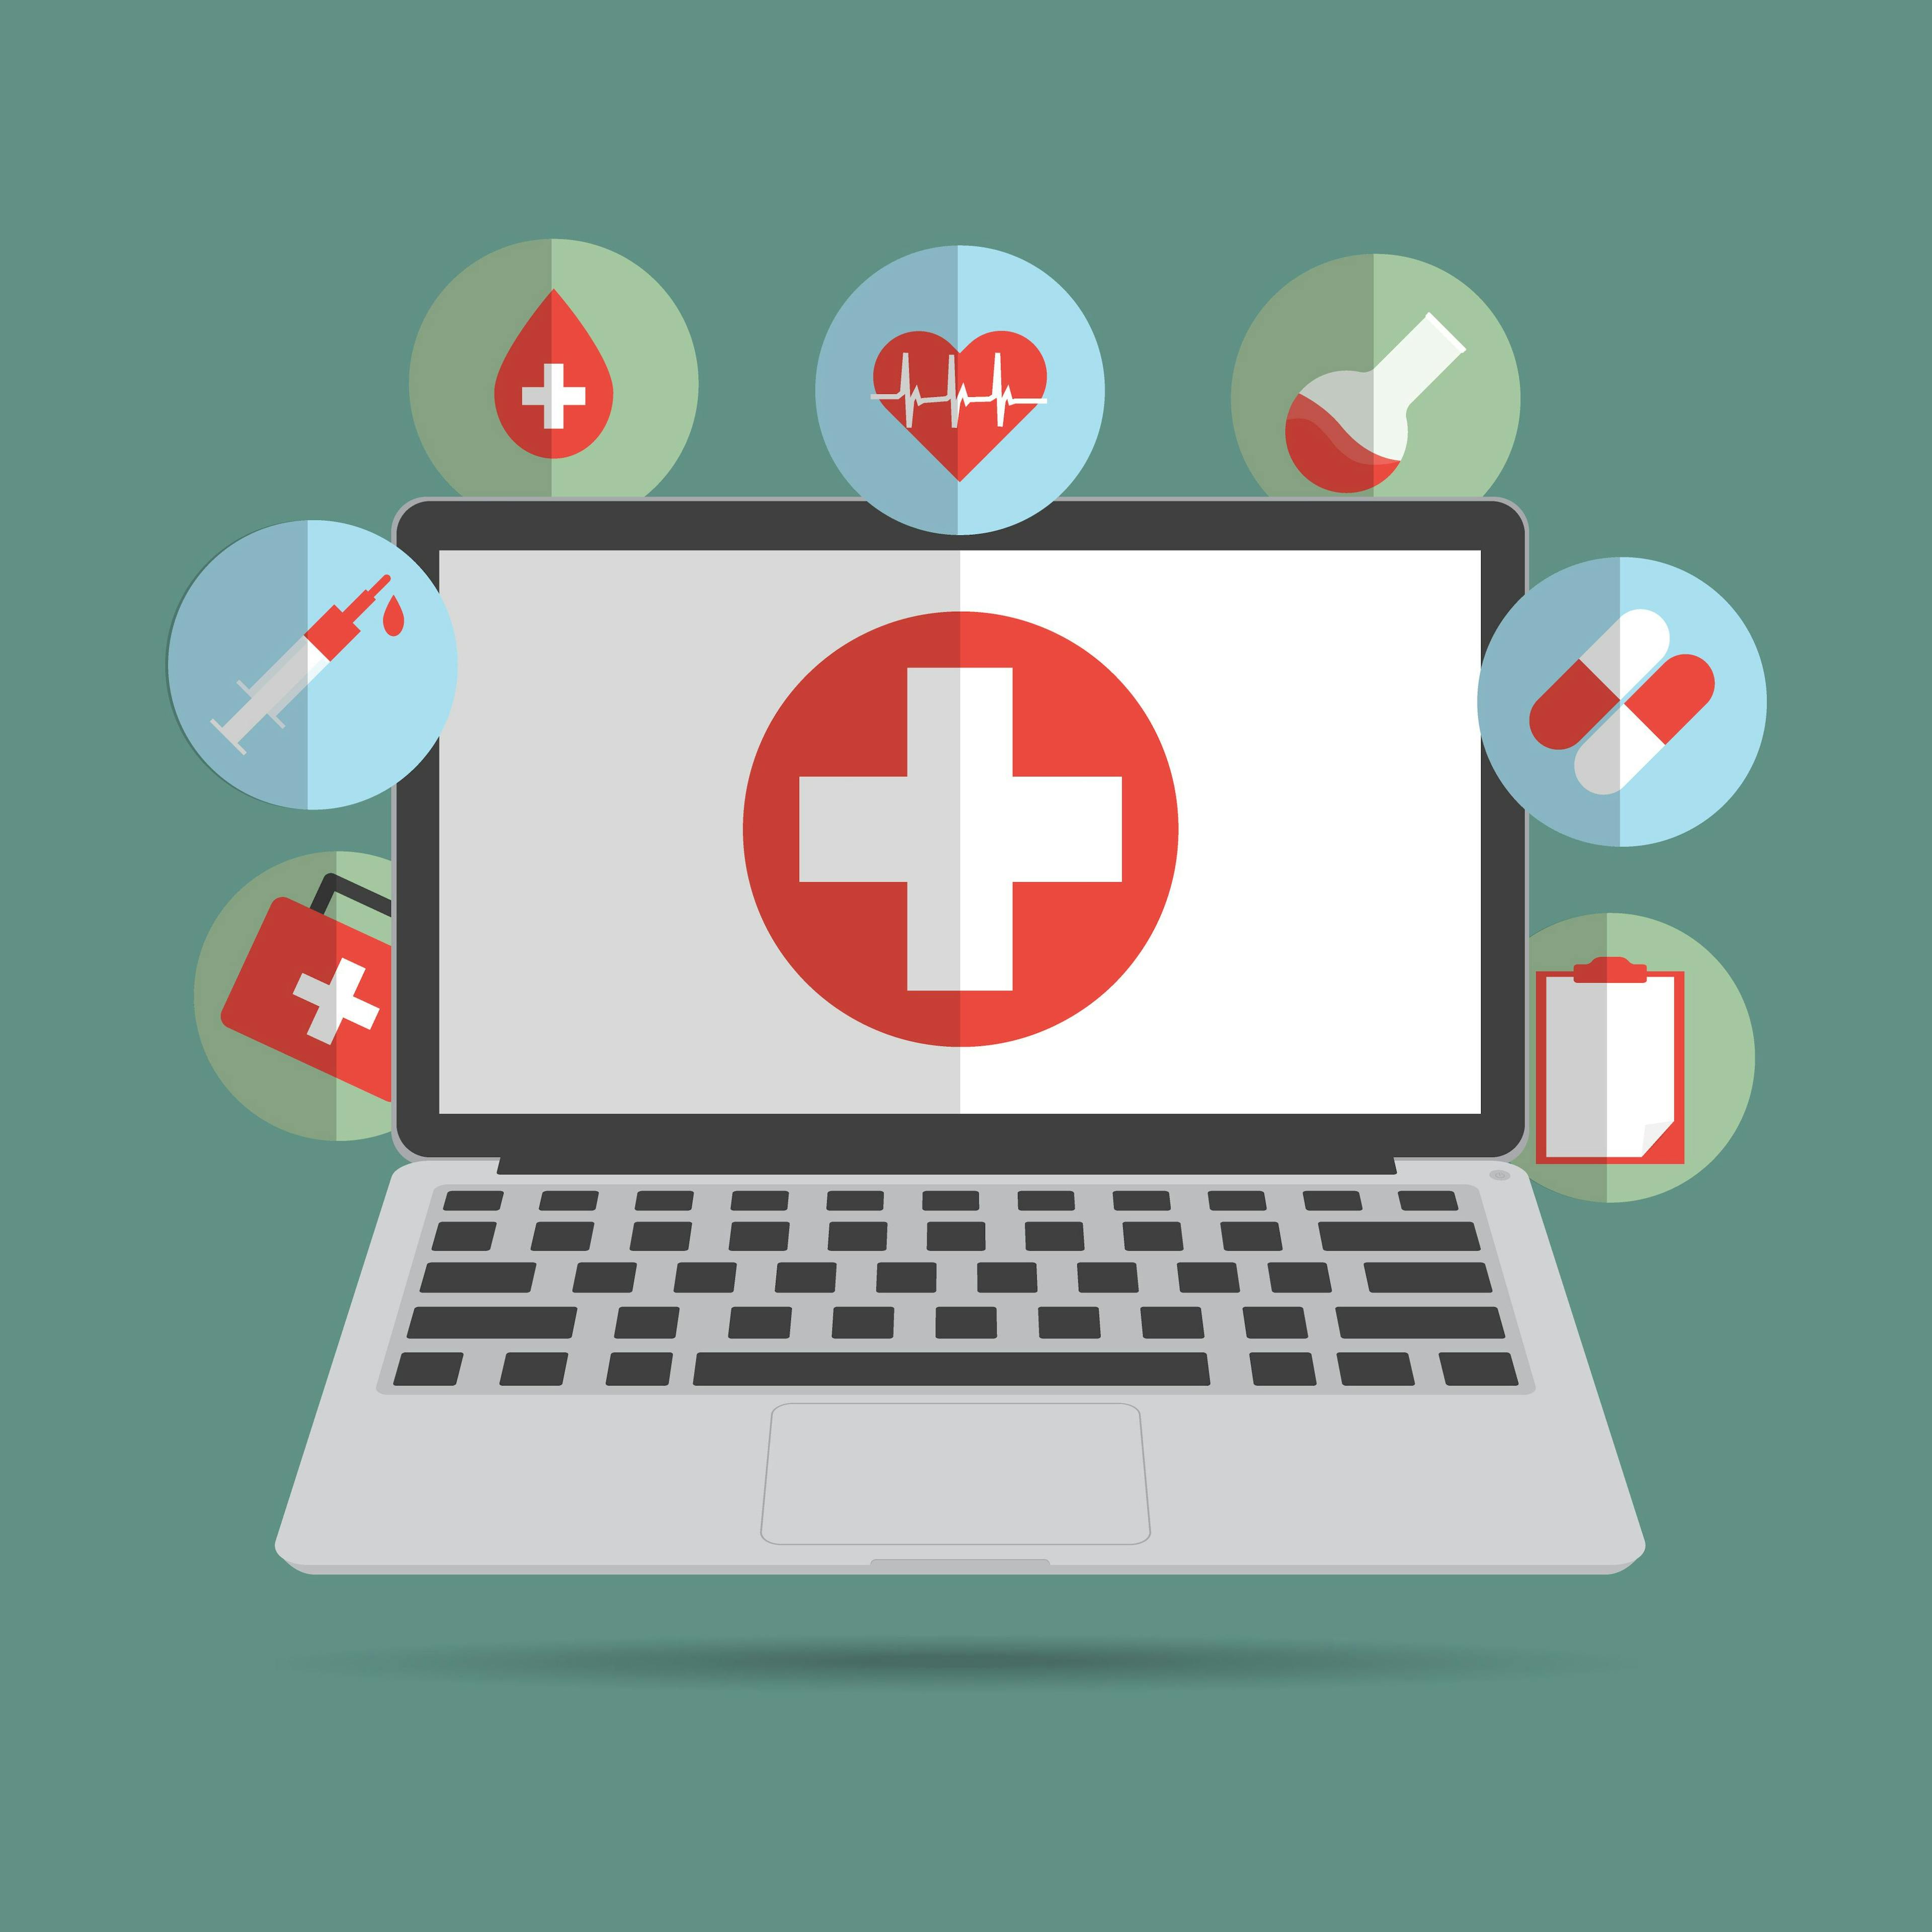 POLL: Is Telehealth Helping or Hurting the Dermatology Specialty?